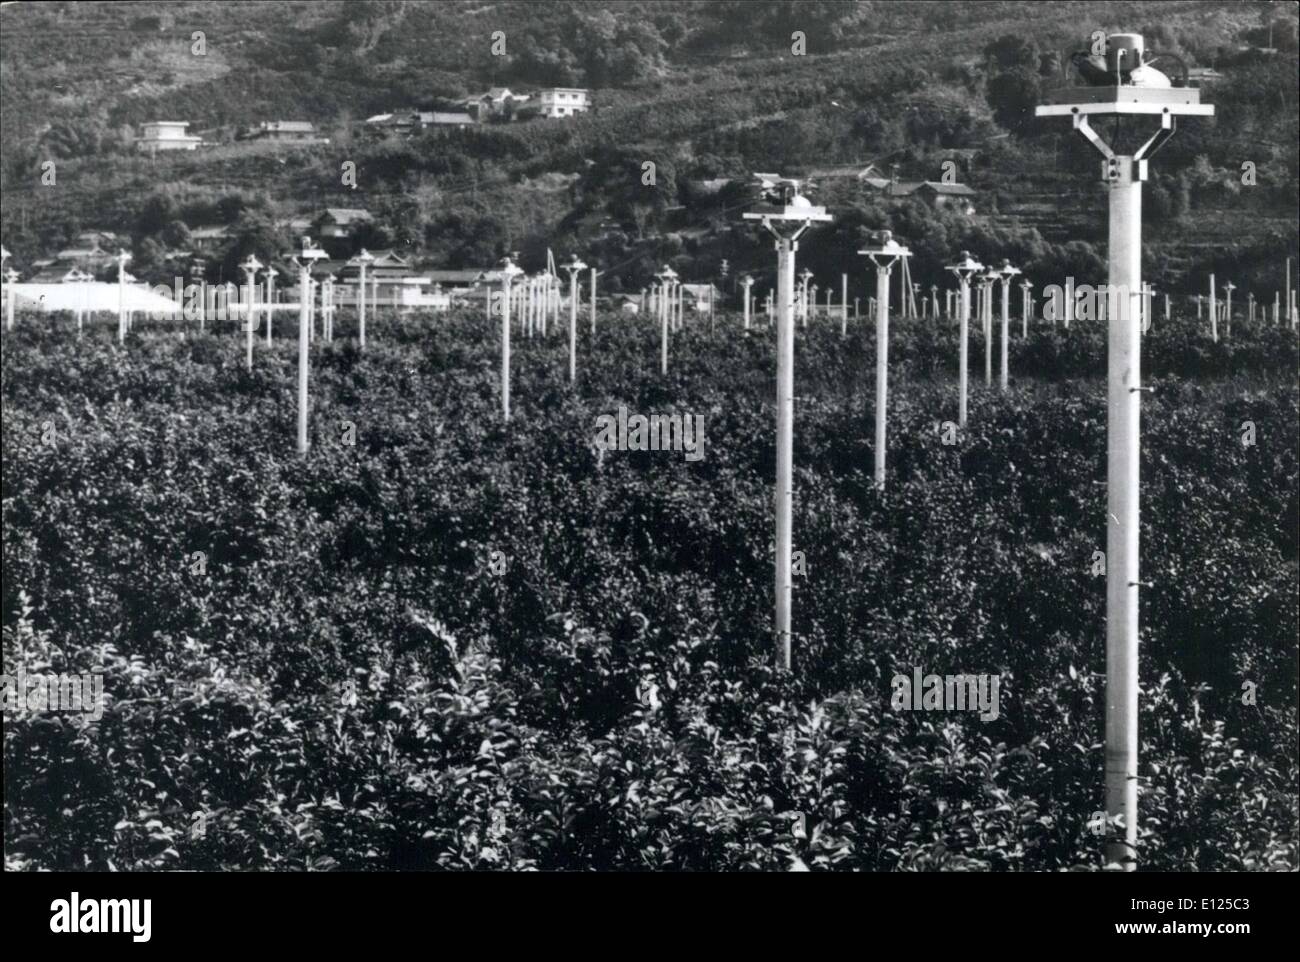 Jan. 01, 1992 - Fans Protect Oranges From Frost: Hundreds of electric fans mounted on 6-foot poles have been installed in an Orange grove in the Wakayama Prefecture, Japan, to Protect the fruit from fruit. The breeze seated by the 1,550 electric fans dispels the formation frost on the oranges, Stock Photo